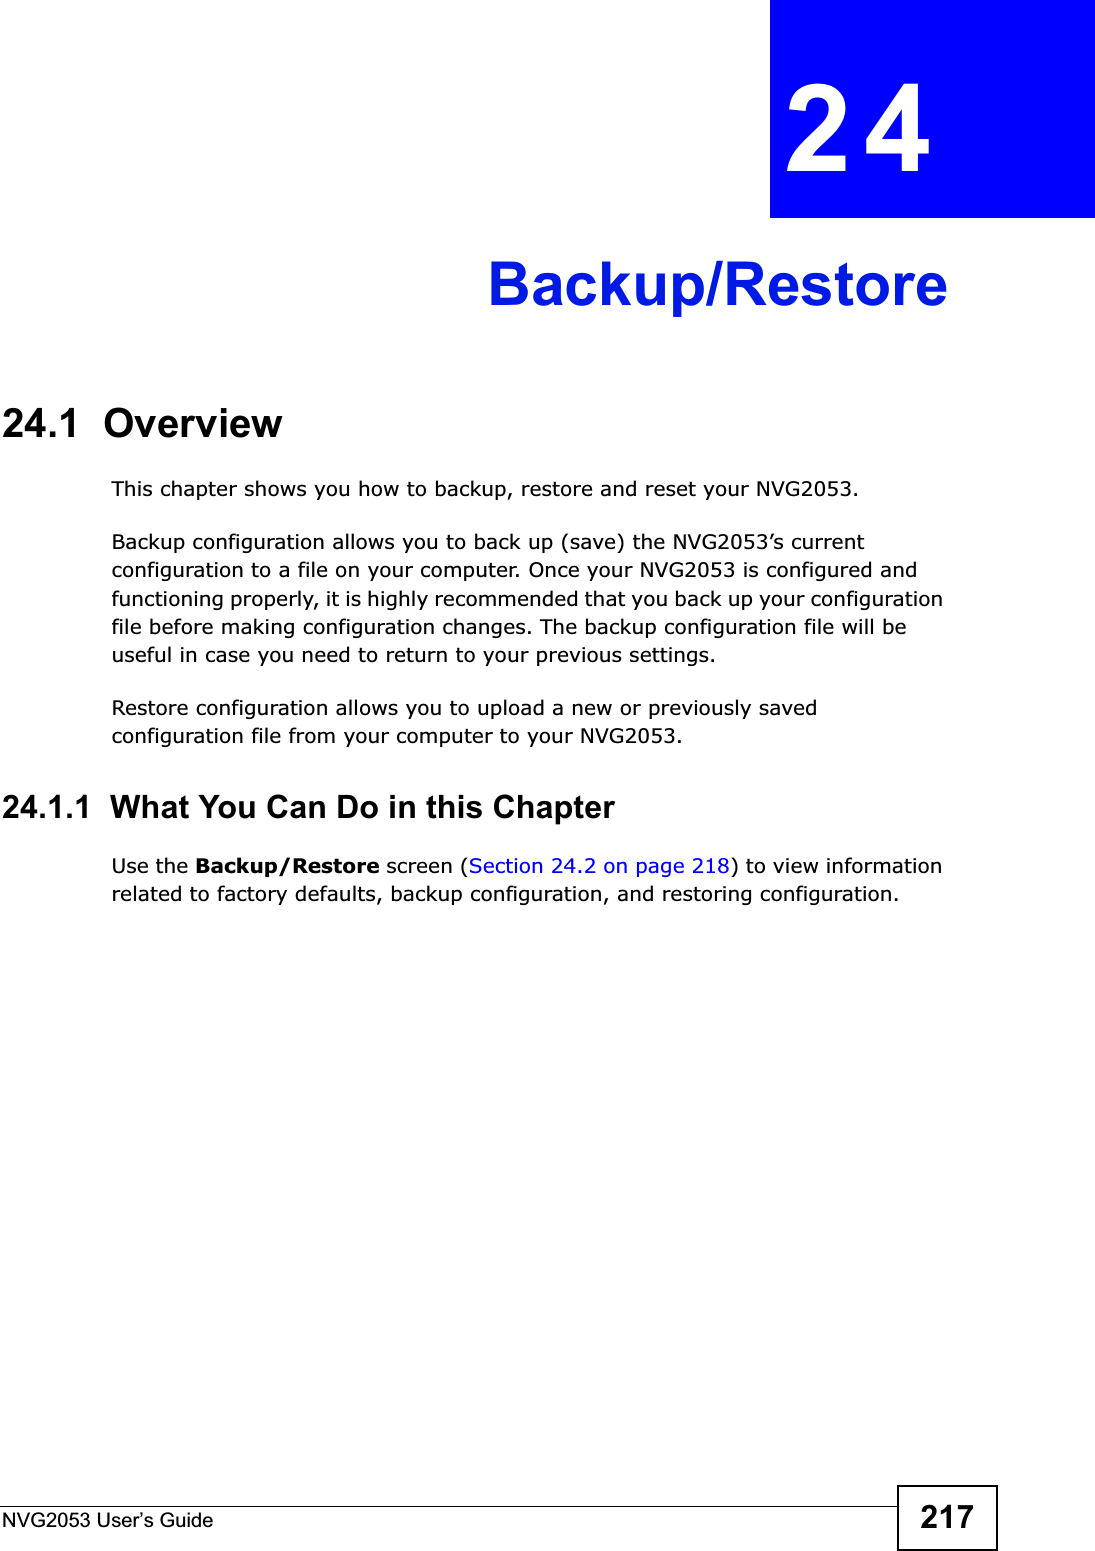 NVG2053 User’s Guide 217CHAPTER 24Backup/Restore24.1  OverviewThis chapter shows you how to backup, restore and reset your NVG2053.Backup configuration allows you to back up (save) the NVG2053’s current configuration to a file on your computer. Once your NVG2053 is configured and functioning properly, it is highly recommended that you back up your configuration file before making configuration changes. The backup configuration file will be useful in case you need to return to your previous settings. Restore configuration allows you to upload a new or previously saved configuration file from your computer to your NVG2053.24.1.1  What You Can Do in this ChapterUse the Backup/Restore screen (Section 24.2 on page 218) to view information related to factory defaults, backup configuration, and restoring configuration.